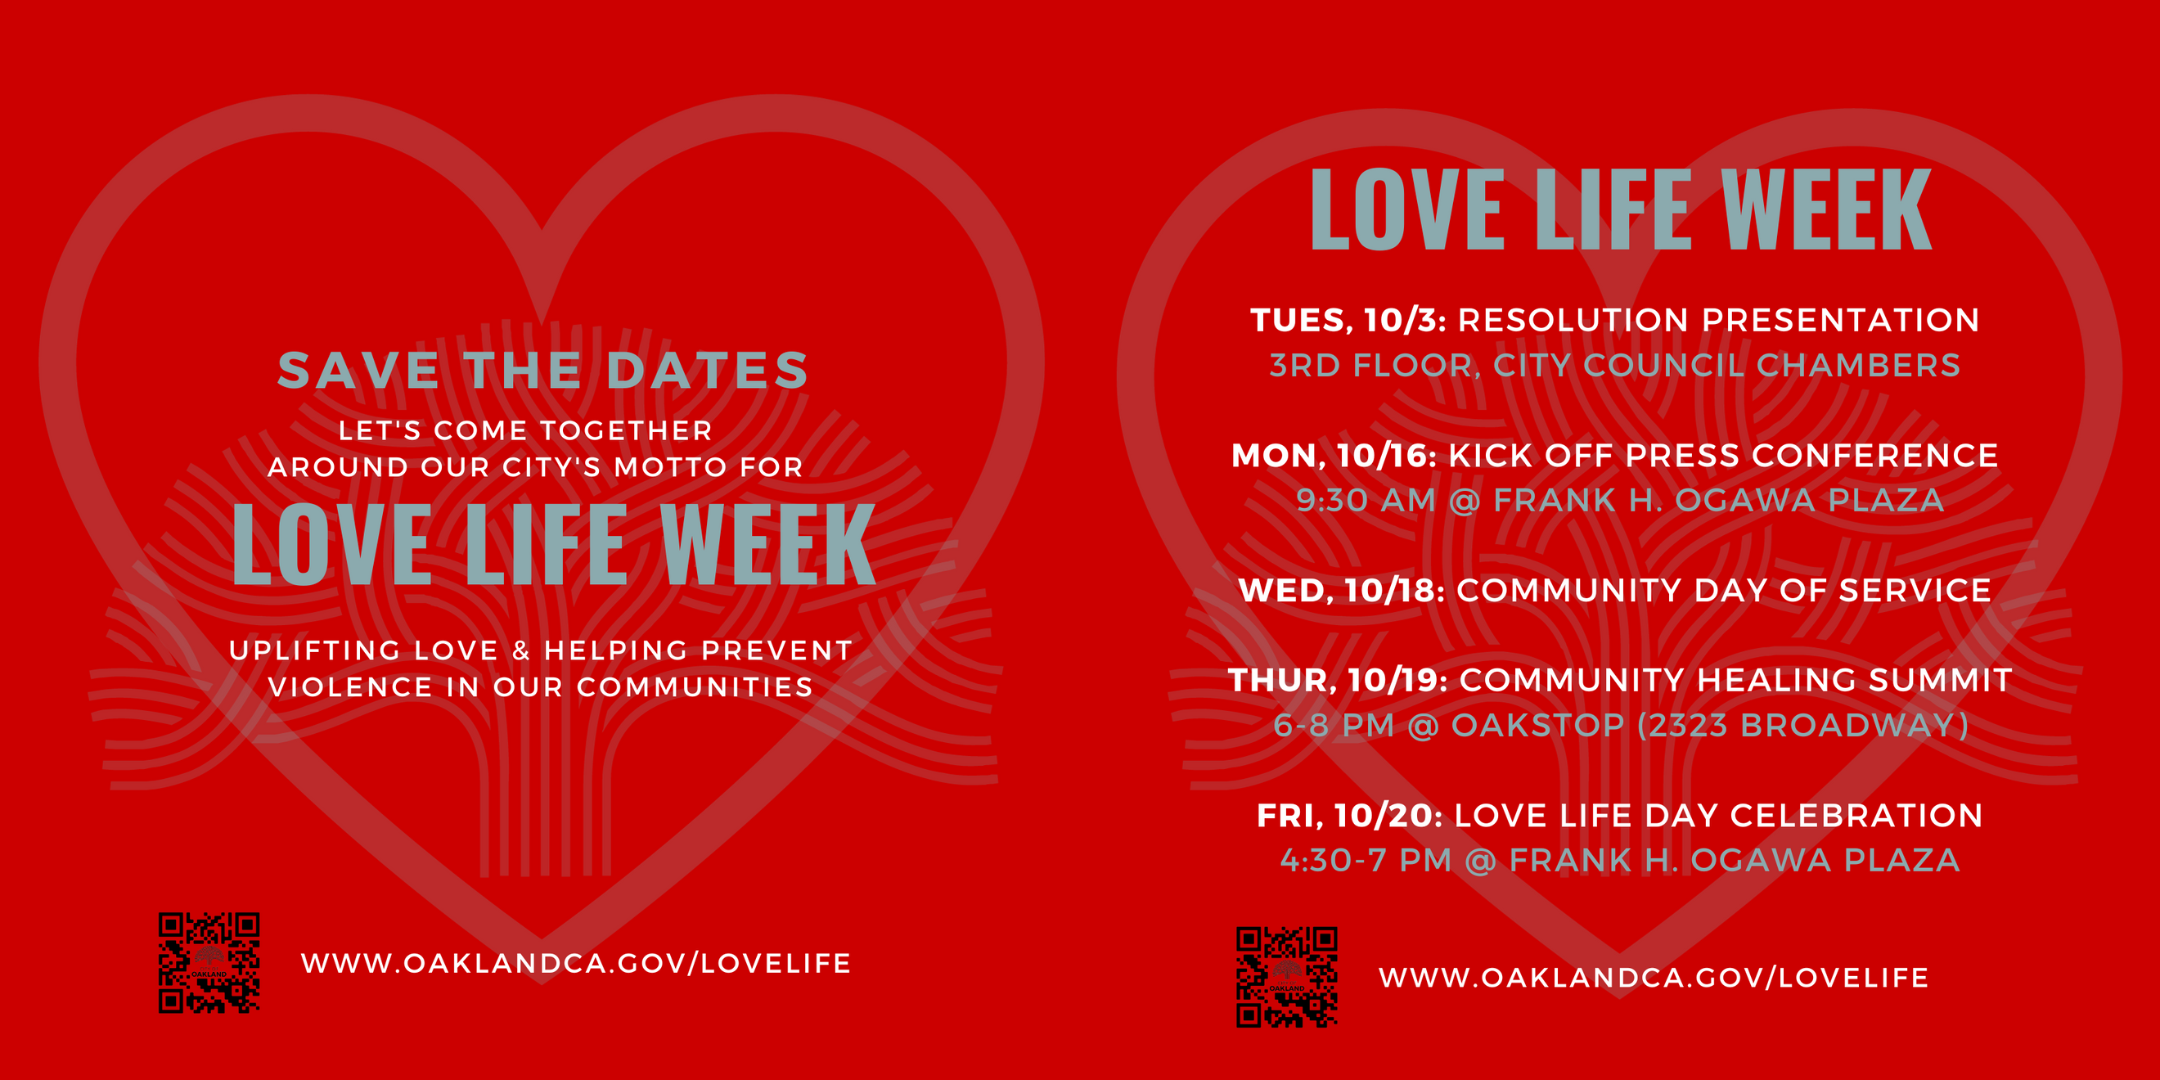 LOVE LIFE WEEK 2023  10/3 - City Council Meeting Presentation  10/16 - Oakland Love Life Kick Off Press Conference  10/18 - Oakland Love Life Community Day of Service  10/19 - Oakland Love Life Community Healing Summit  10/20 - Oakland Love Life Day of Celebration